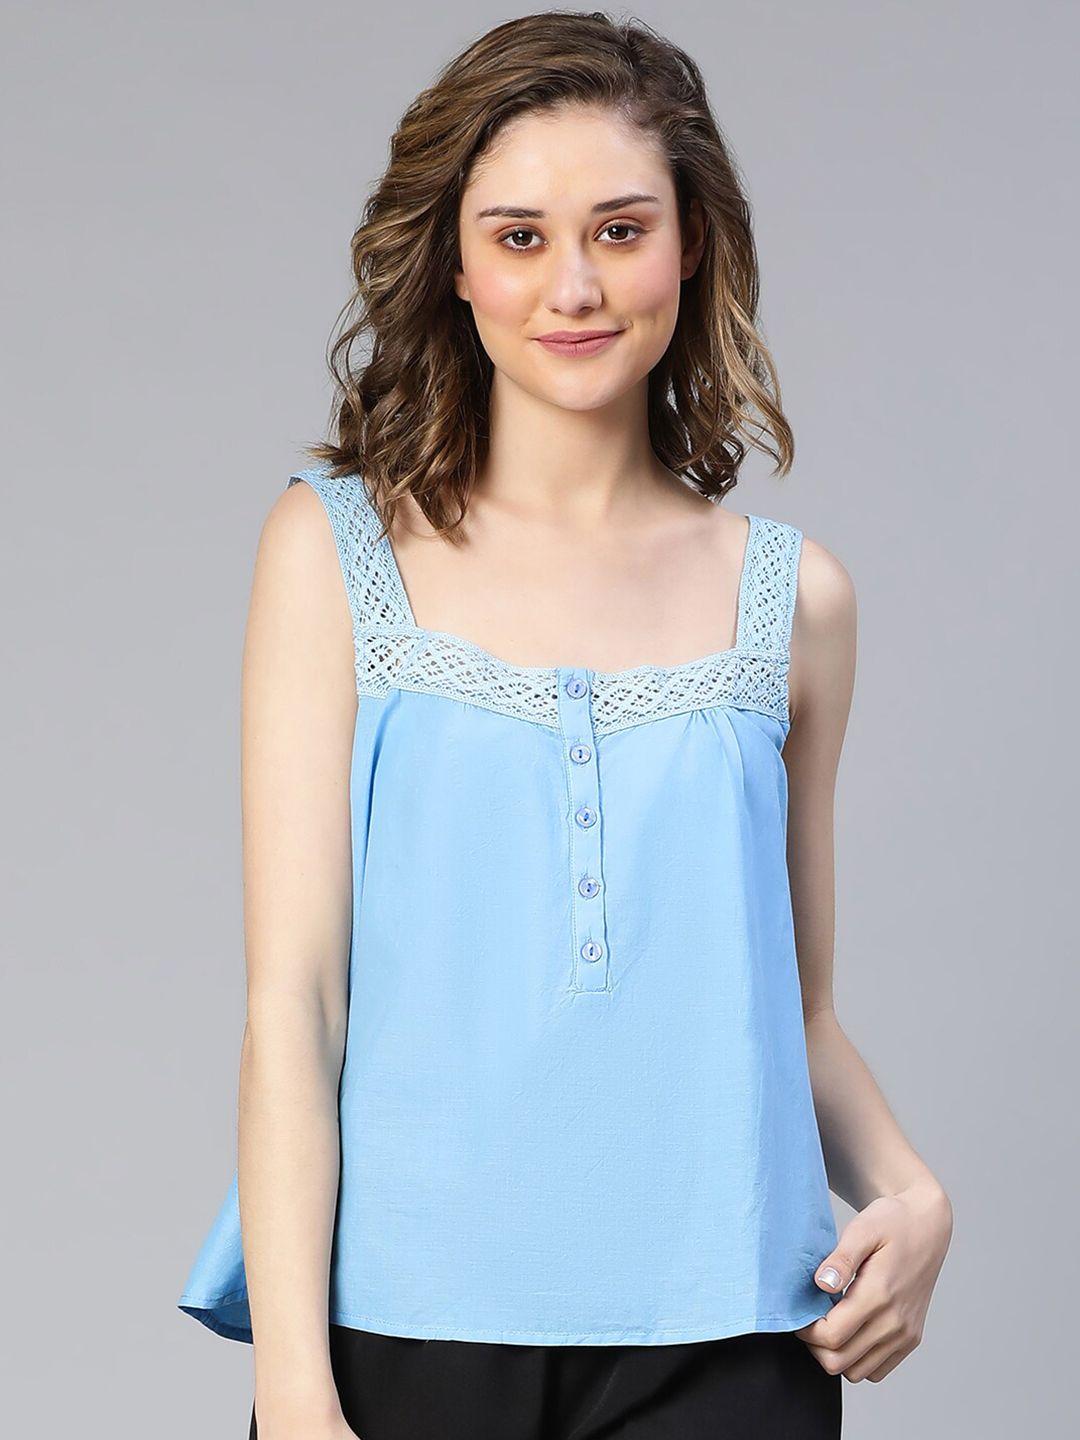 oxolloxo-square-neck-sleeveless-laced-with-buttons-cotton-top